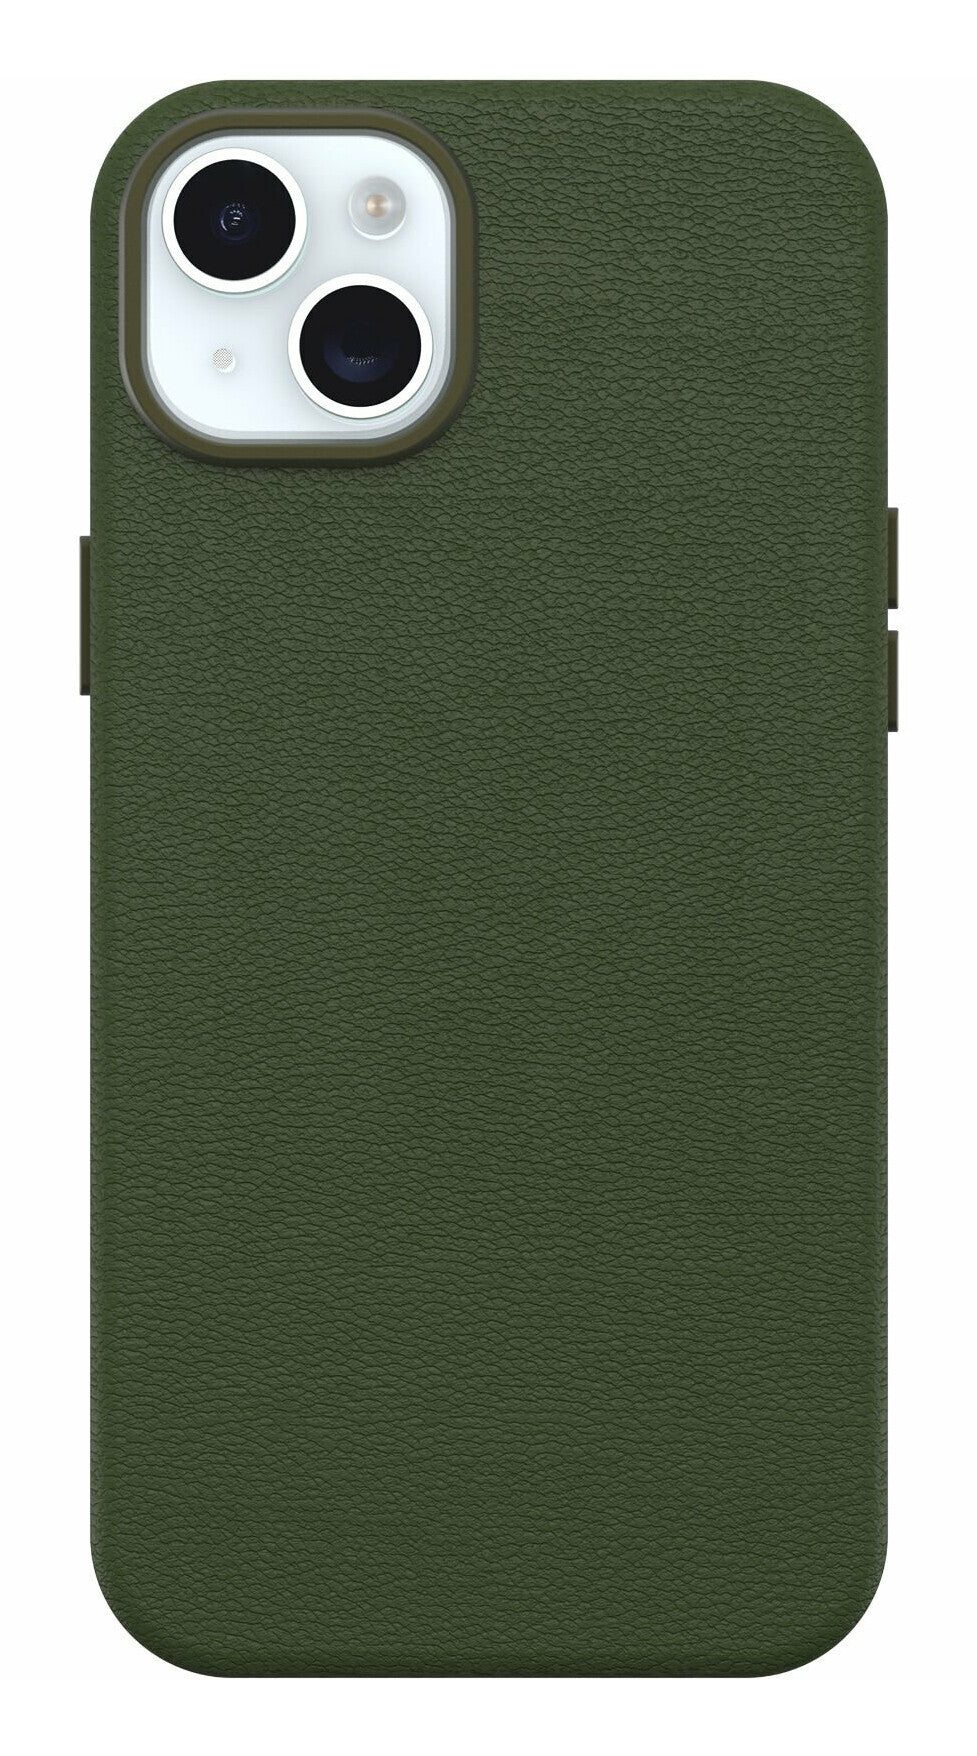 OtterBox Symmetry Cactus with MagSafe for iPhone 14 Plus / 15 Plus in Cactus Grove